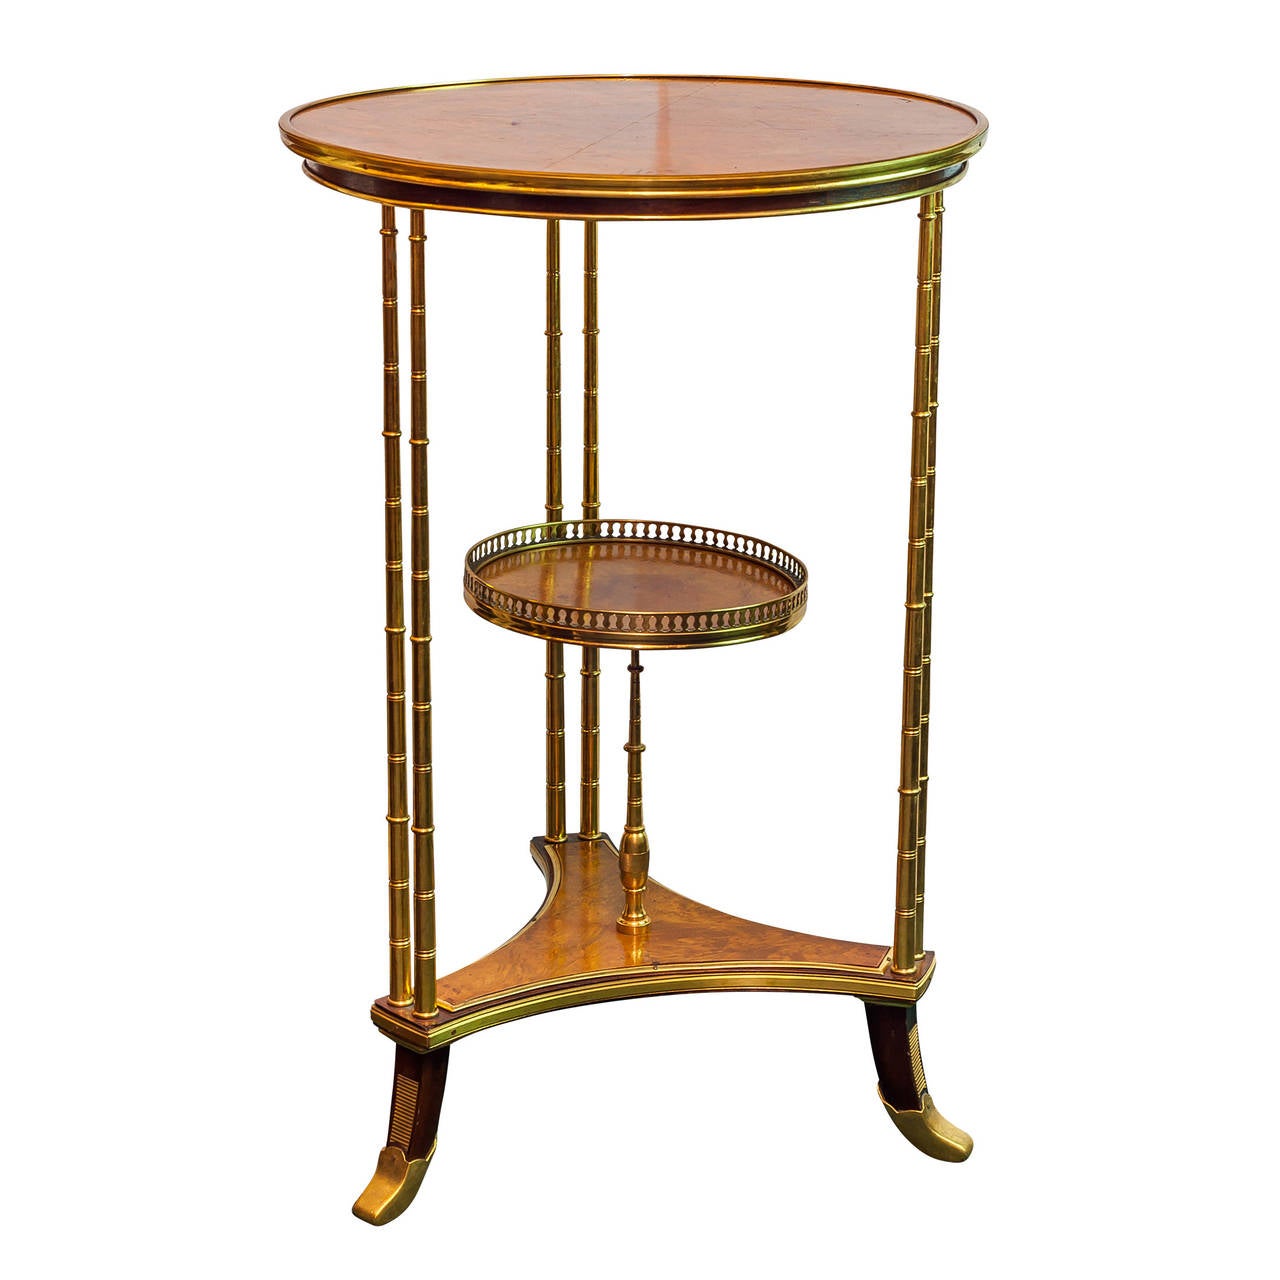 French Pair of Russian Empire Style Neoclassical Bronze-Mounted Round Side Tables